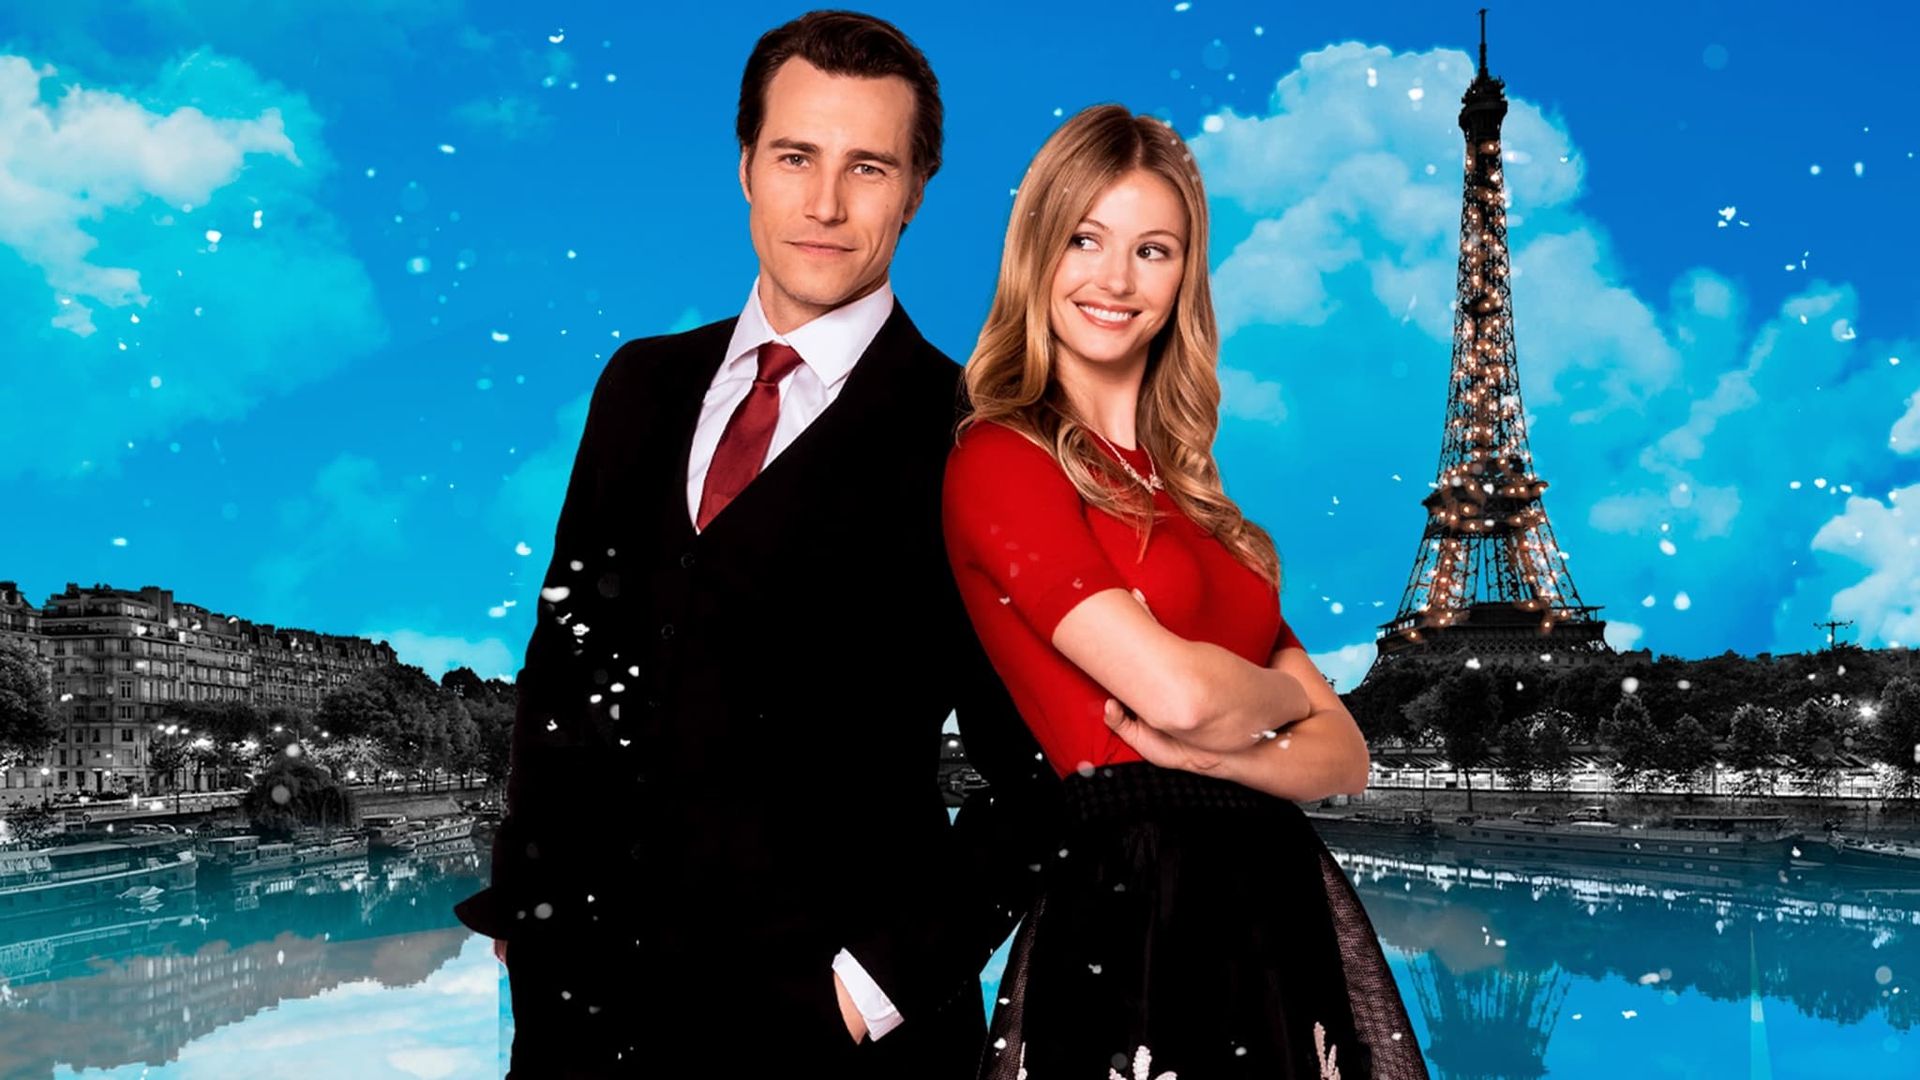 Christmas in Paris background